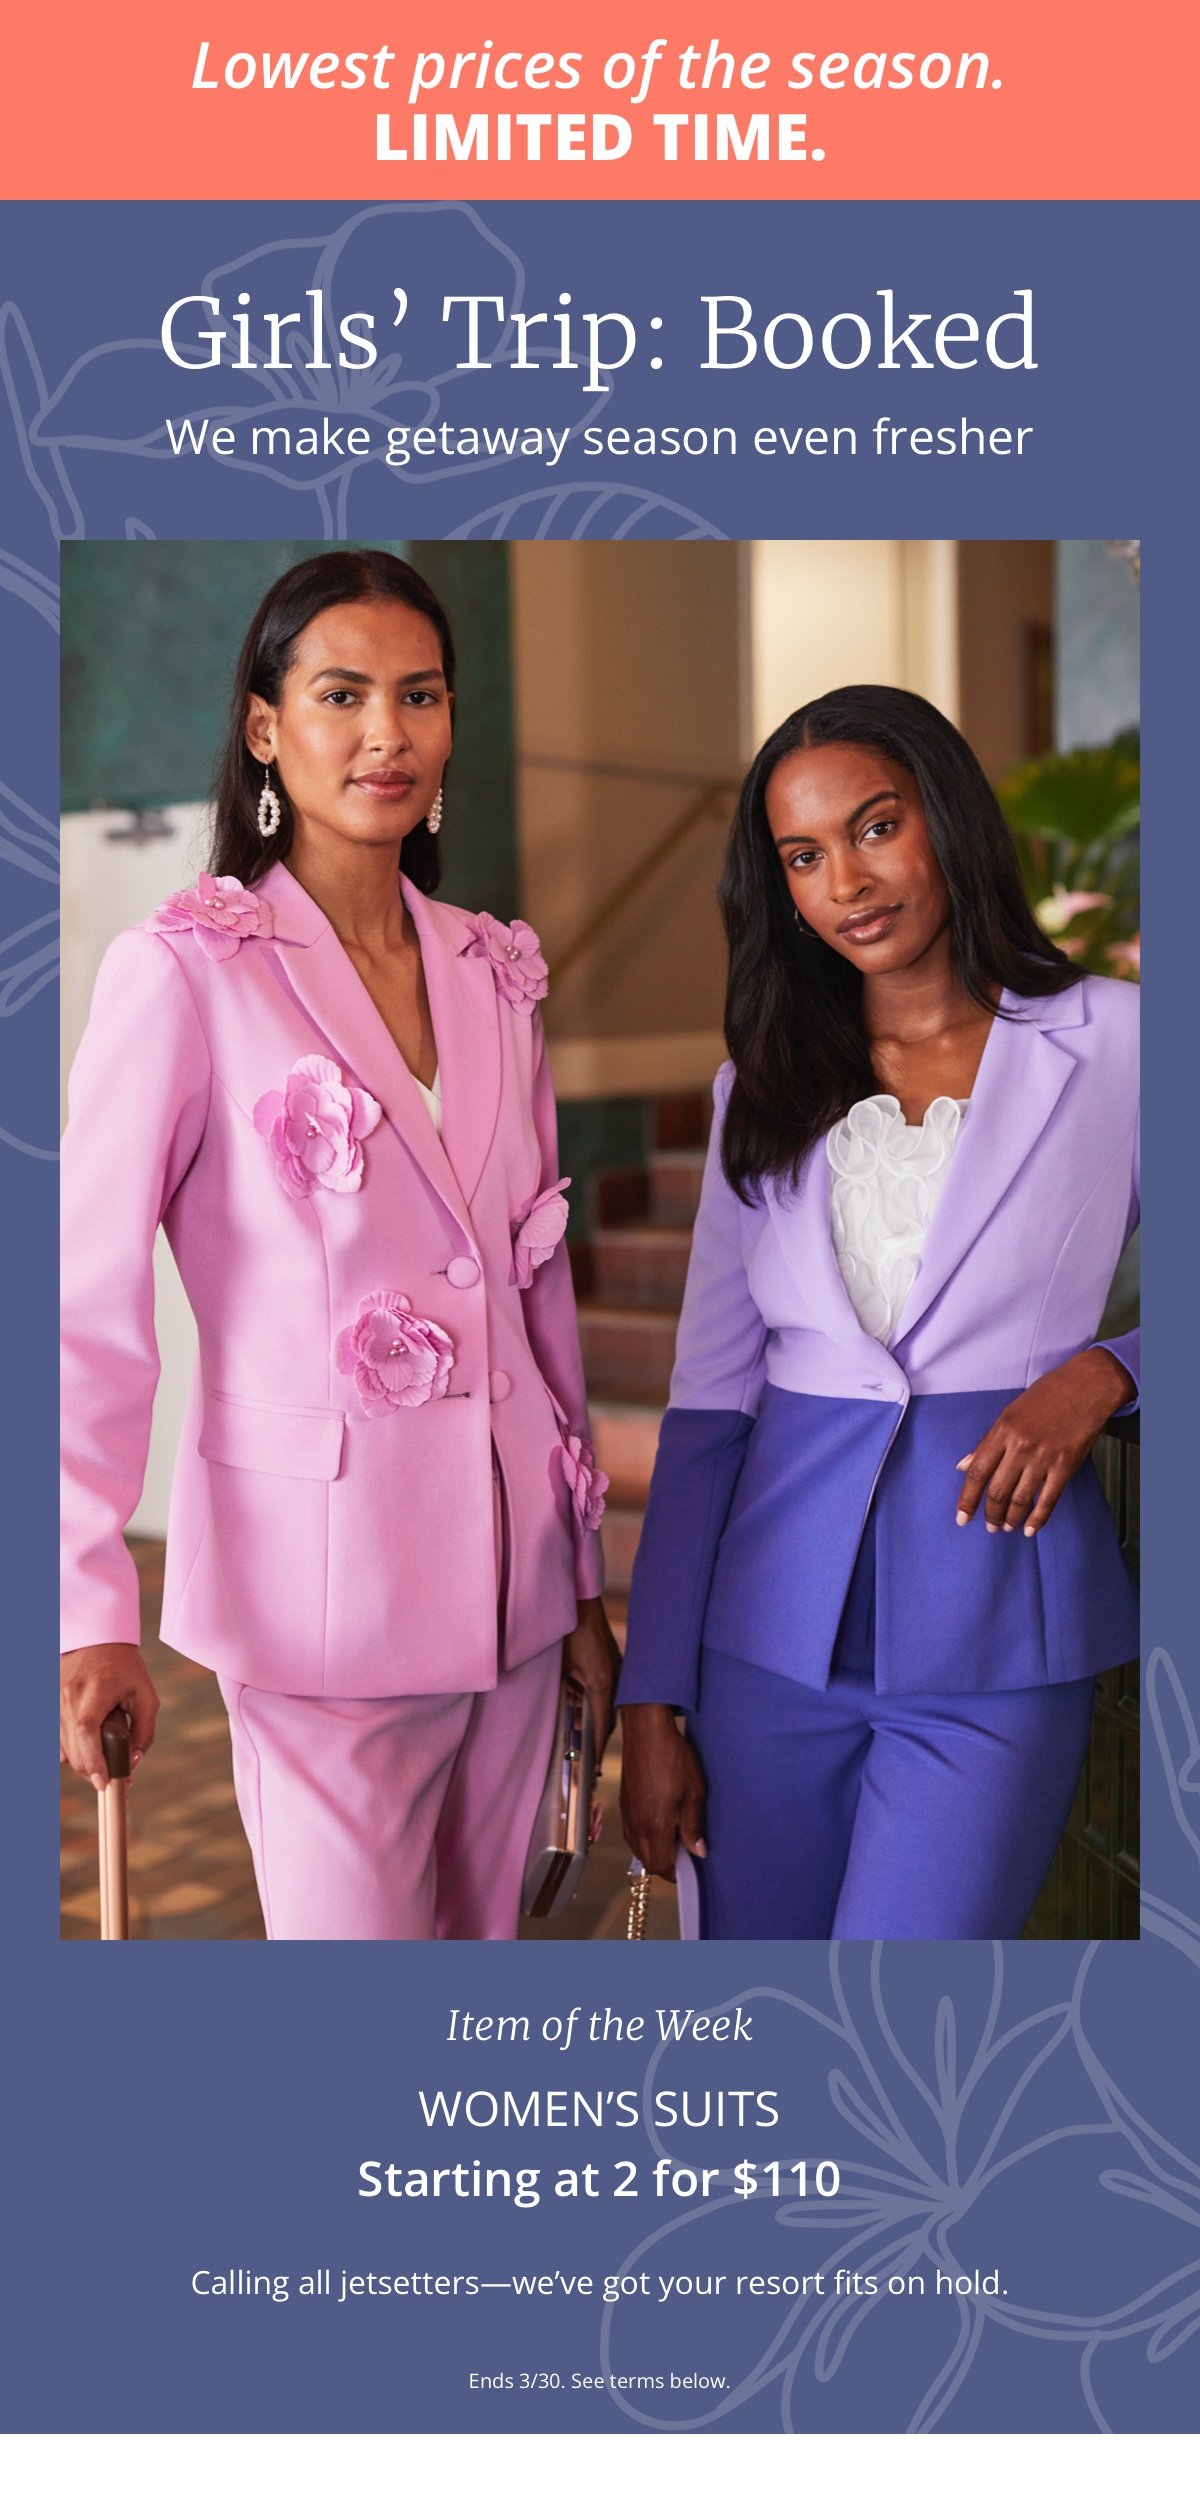 LOWEST PRICES OF THE SEASON. LIMITED TIME.|Girls' Trip: Booked|We make getaway season even fresher|Item of the Week|Women's Suits|Starting at 2 for \\$110|Calling all jetsetters—we've got your resort fits on hold.|Ends 3/30. See terms below. 